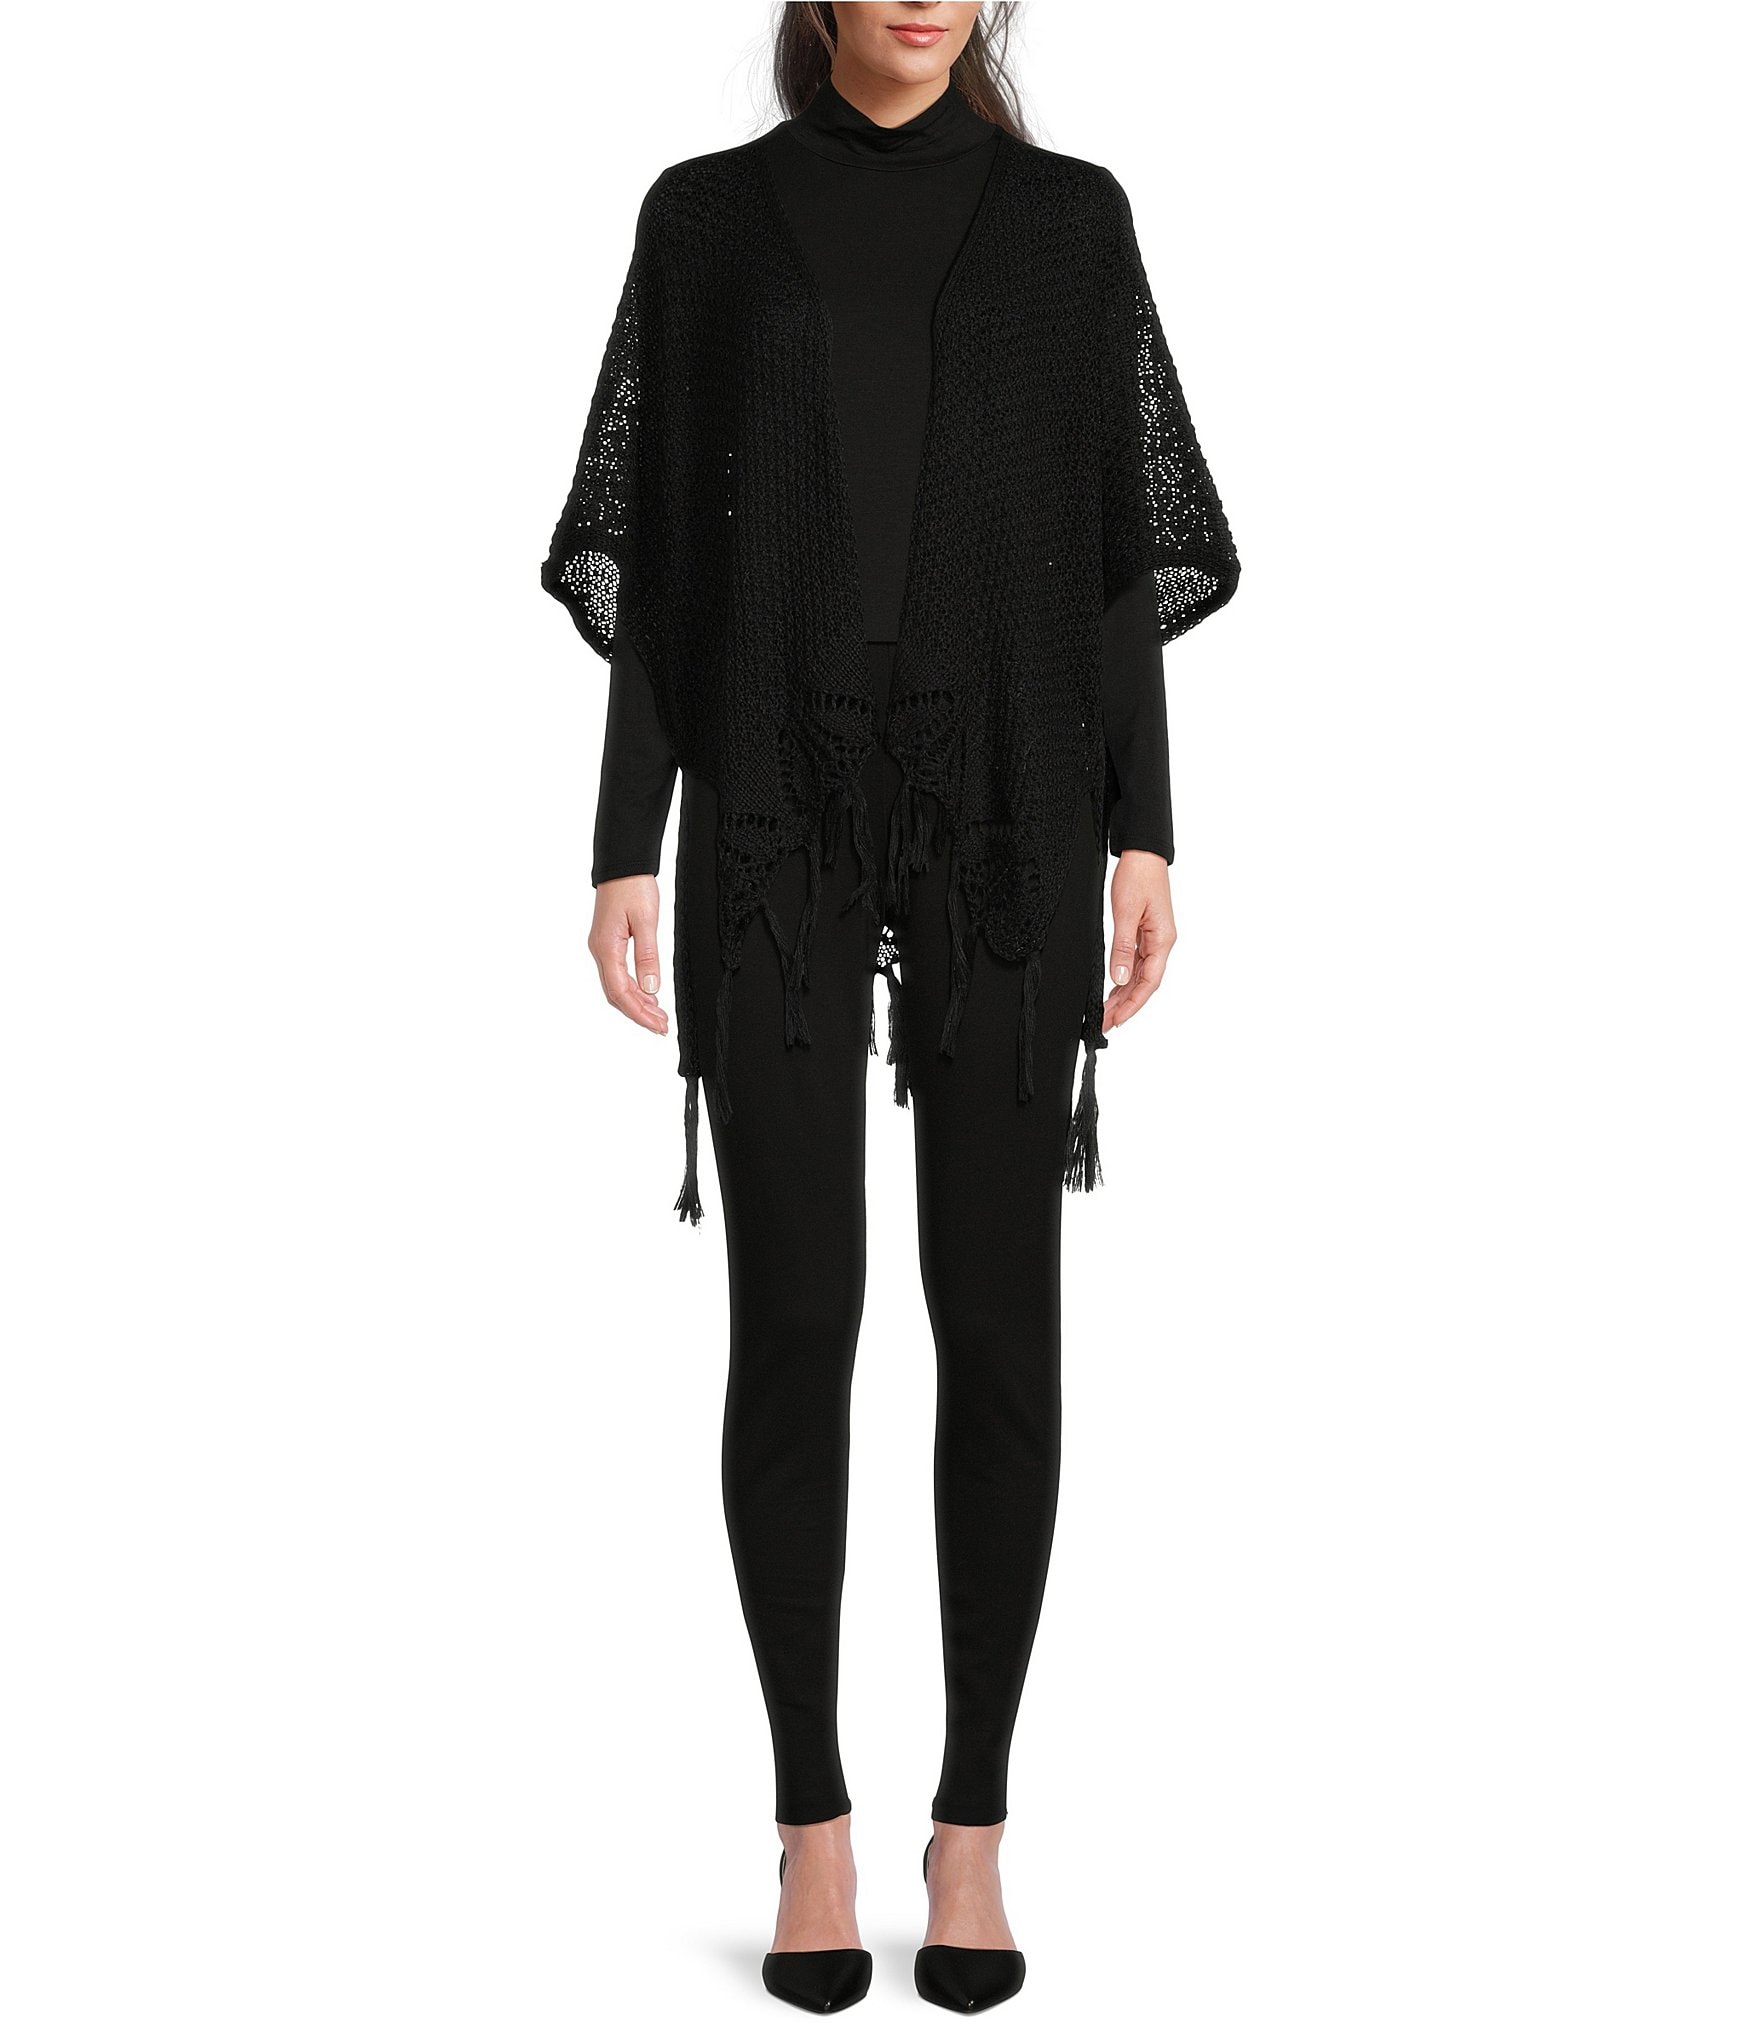 Daily Deals // Vince Camuto Outerwear, Activewear by RYU & X by Gottex &  HEAD & New Balance, SOLOW Sport, Giovannio Hats, ASH, LAUREN Ralph Lauren  Handbags, Jules Smith Jewelry at MYHABIT 